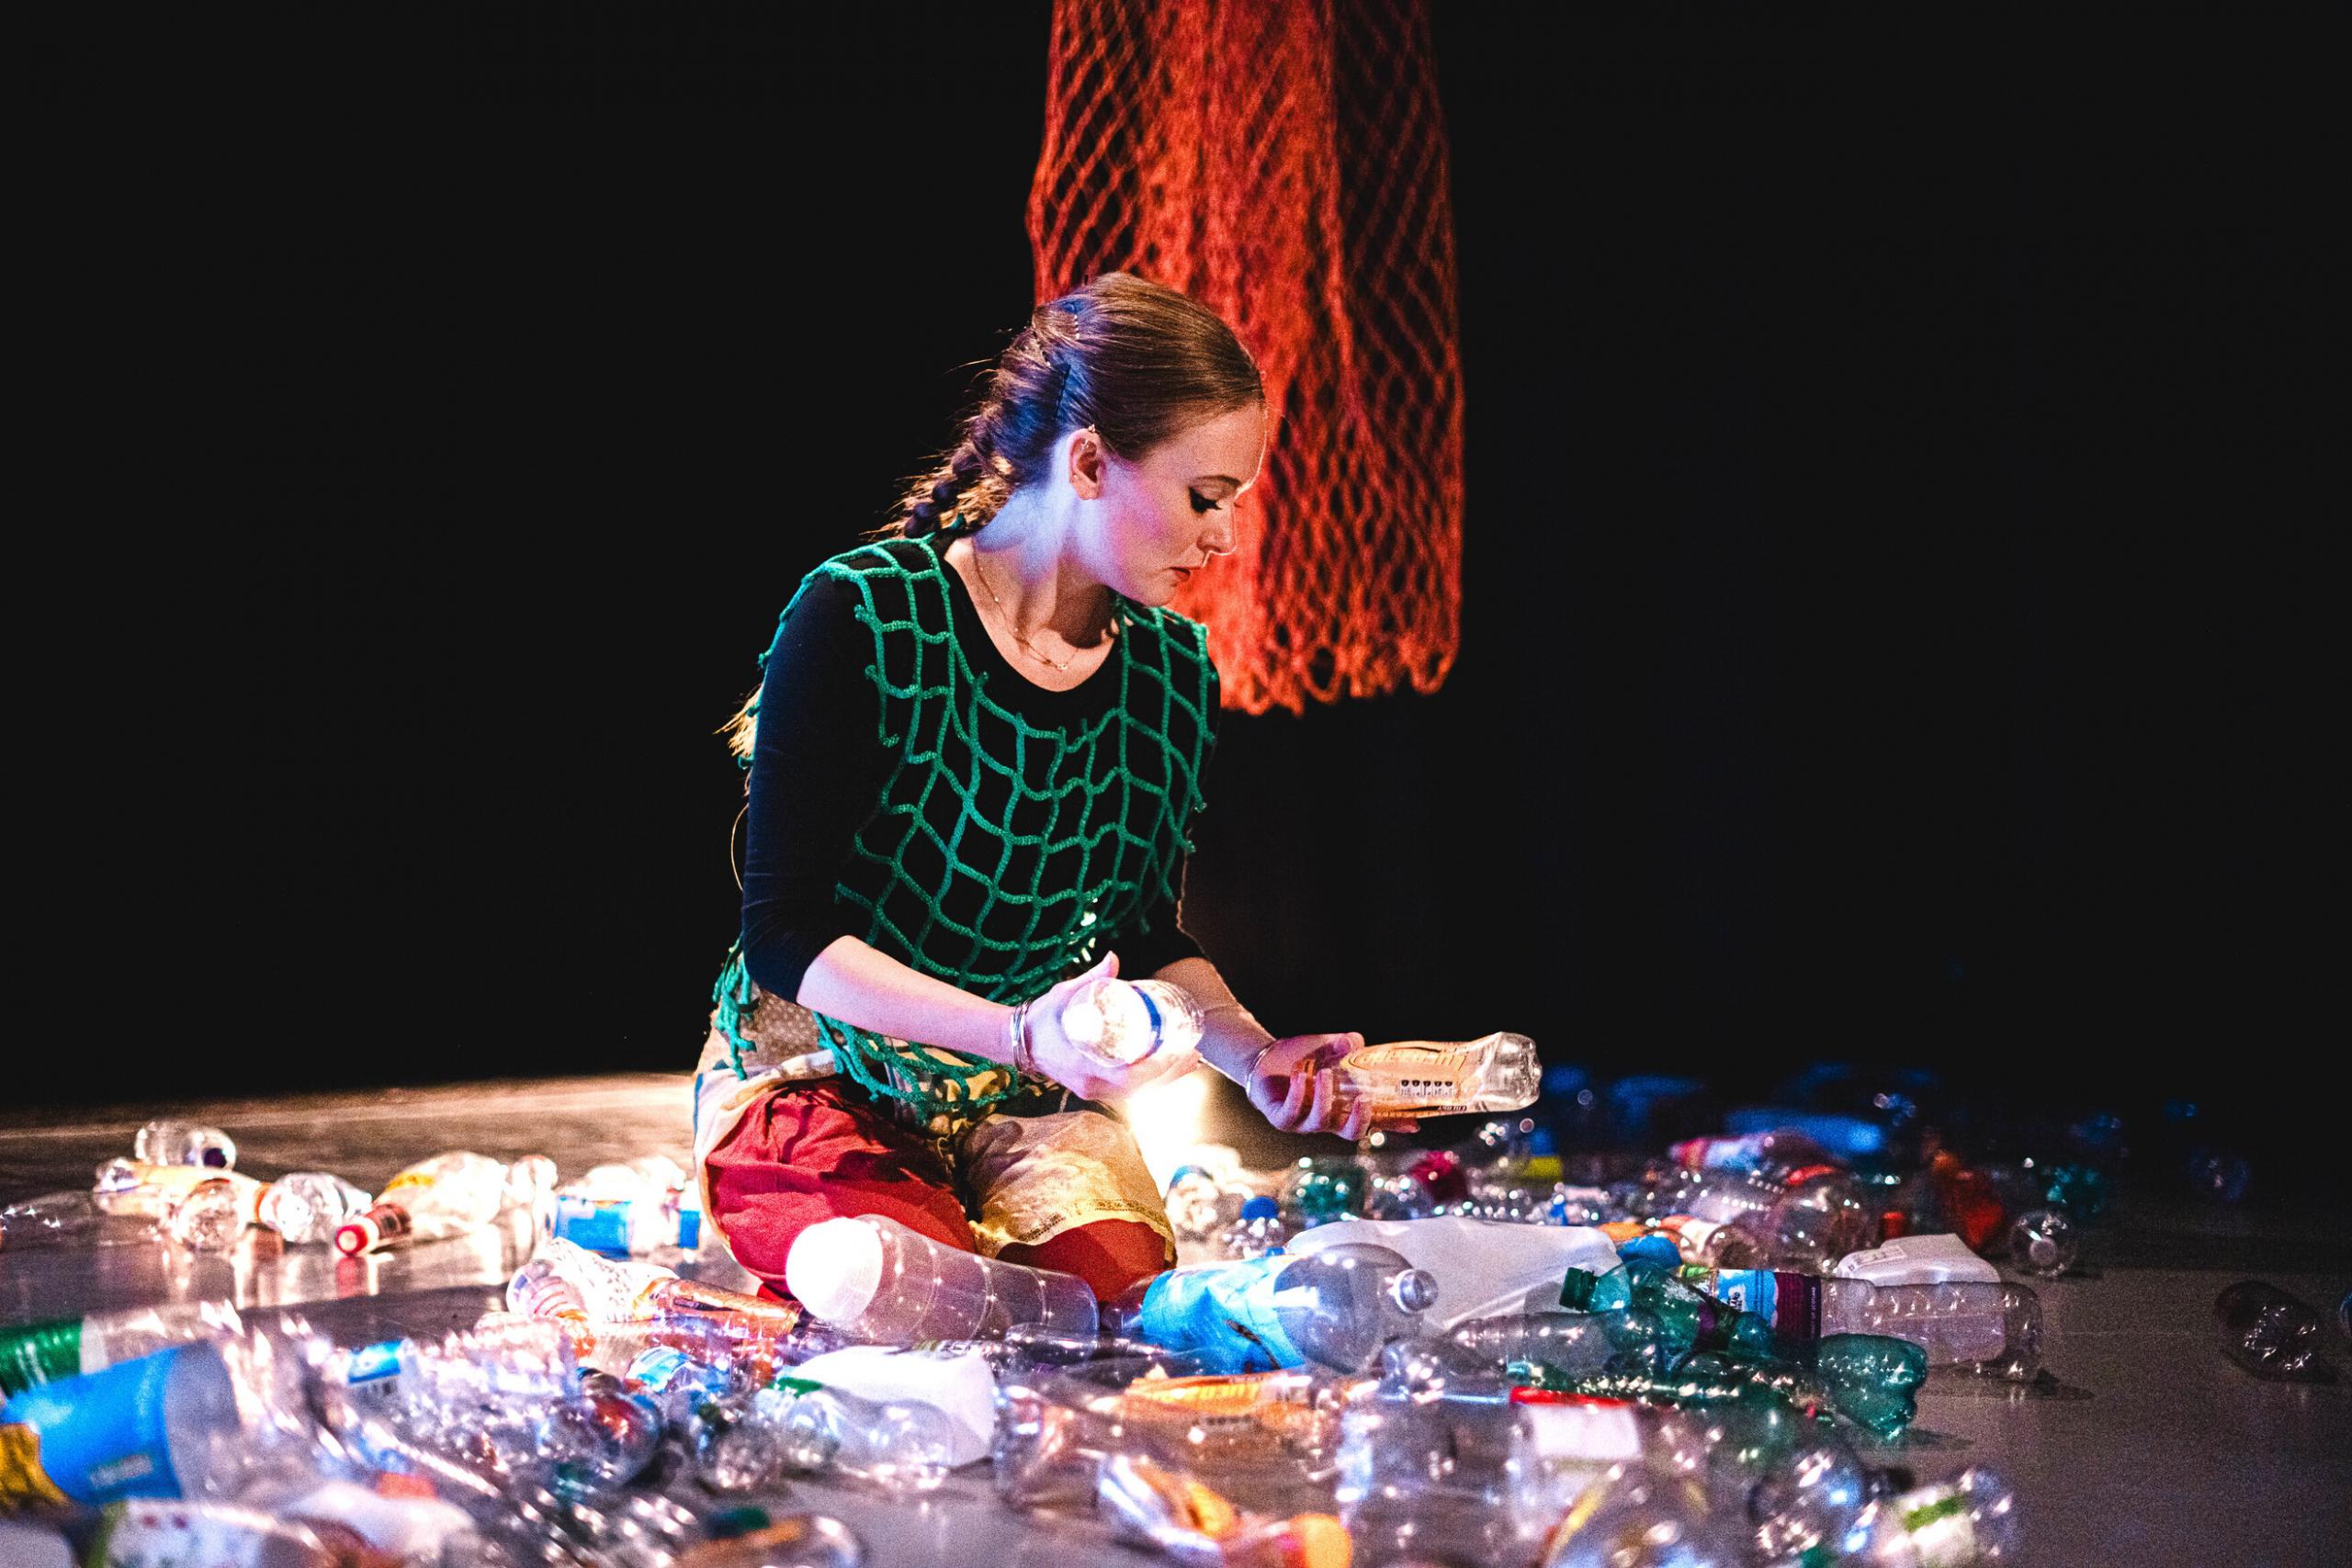 A white female dance artist sitting in the midst of plastic bottles, looking down at them against a black background with an orange fishnet hanging behind her.